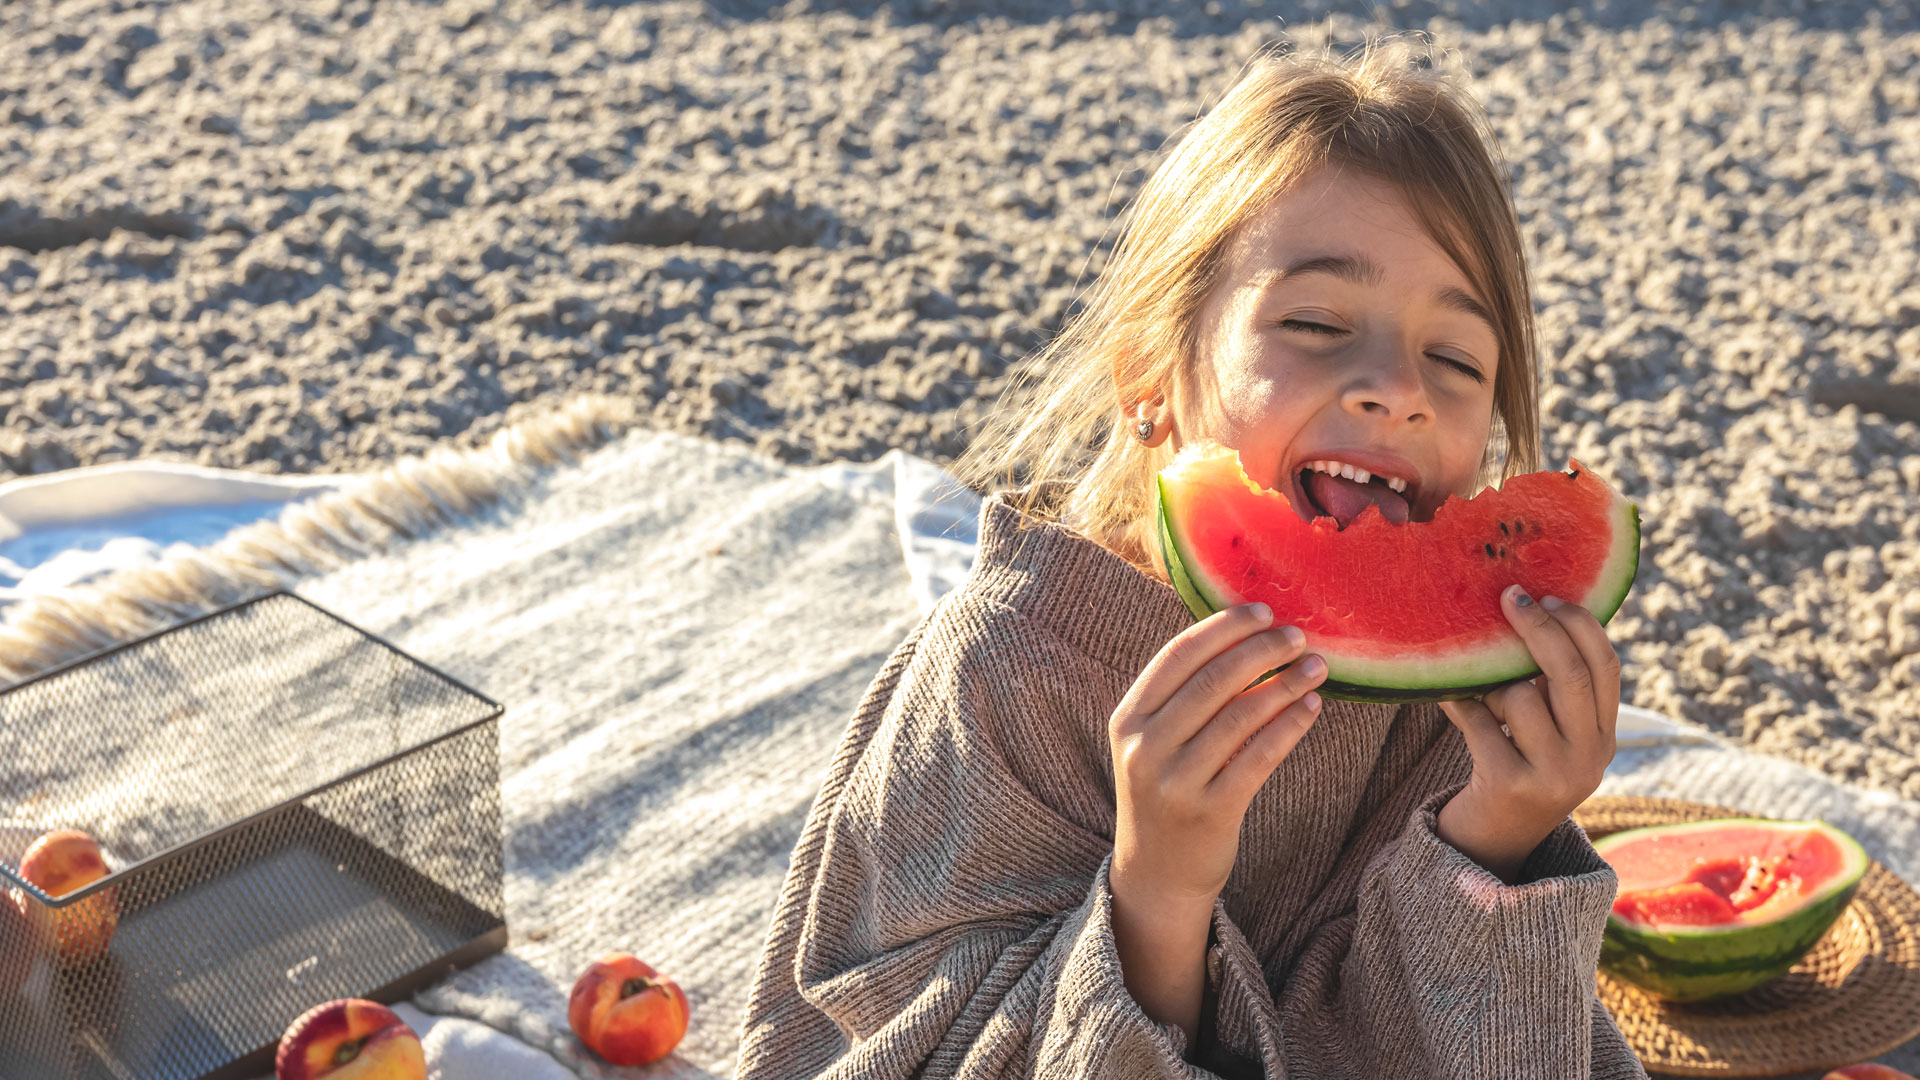 The Annual Outer Banks Watermelon Festival